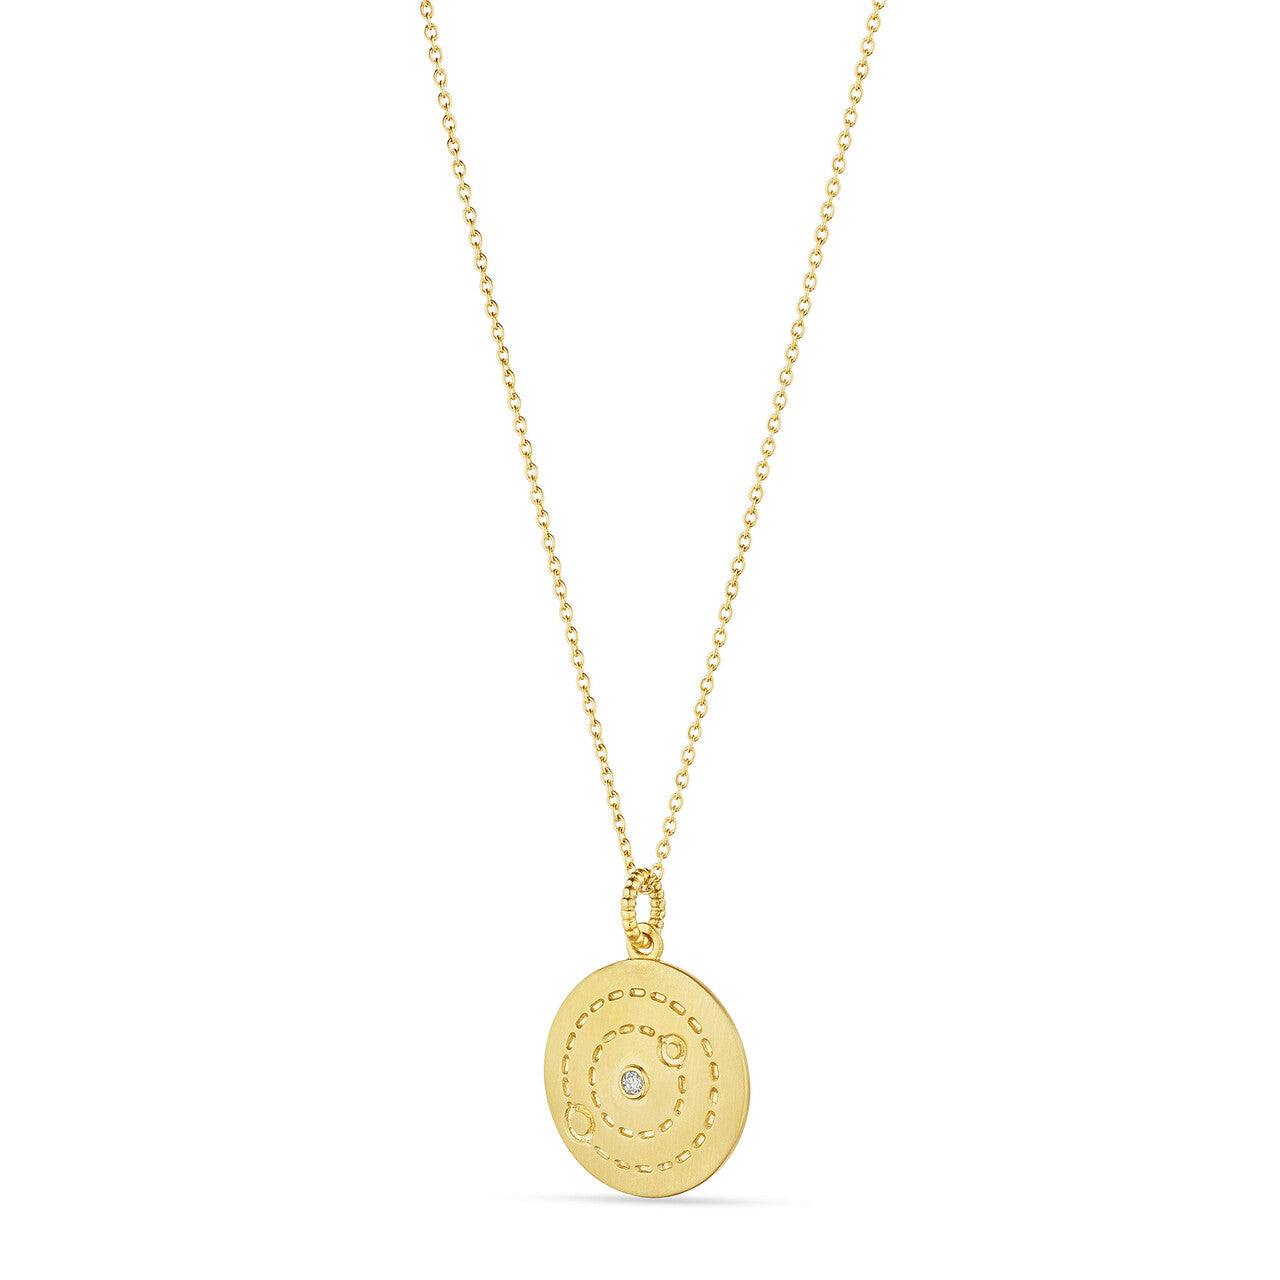 Little Luxuries Cosmic Medallion Necklace with Diamonds in 14K